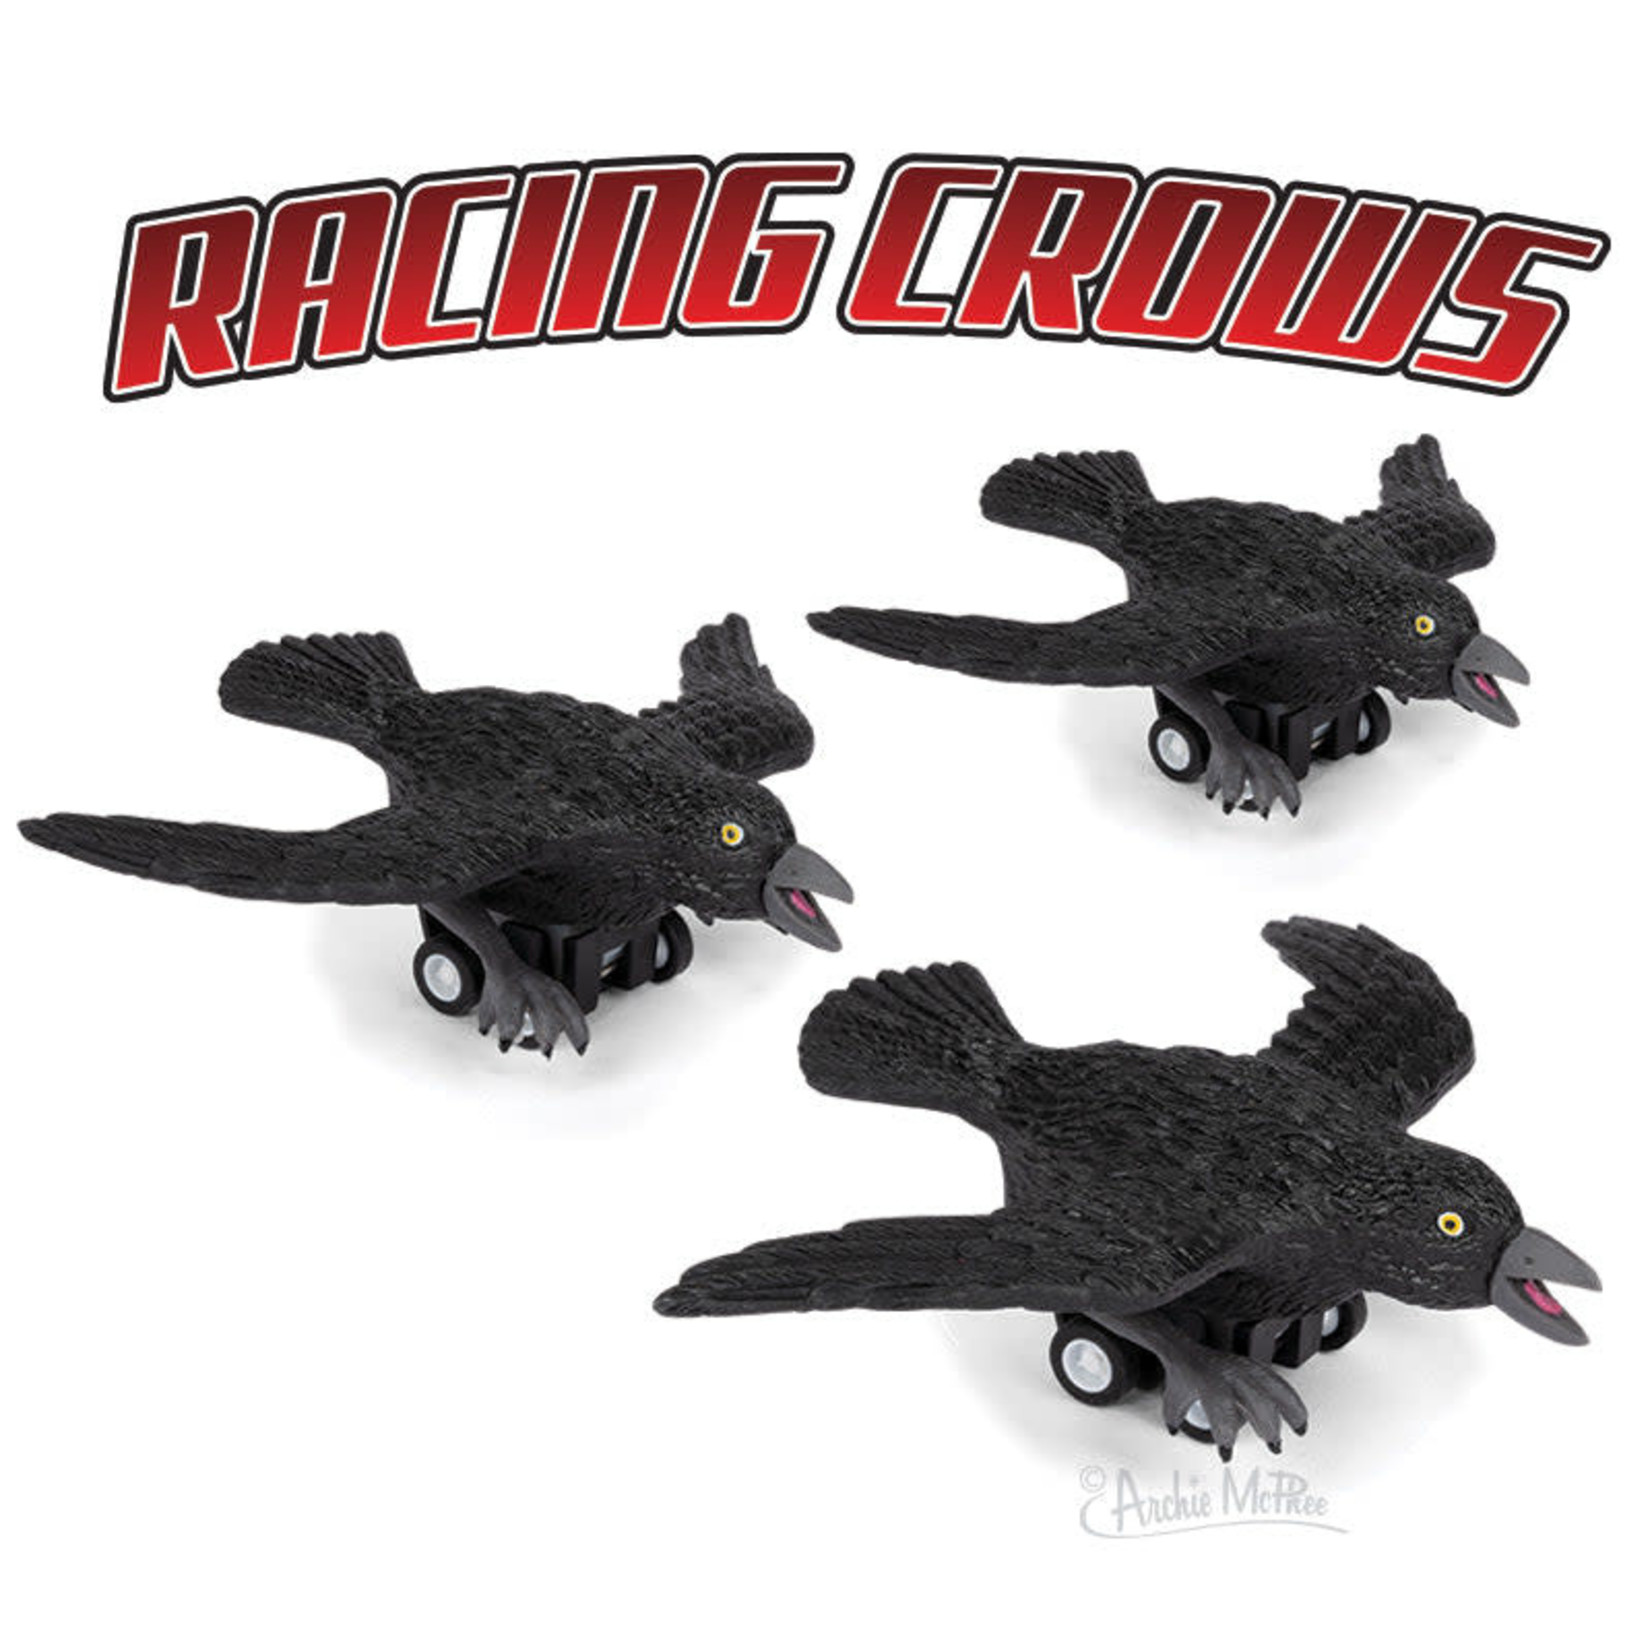 Toy - Racing Crows